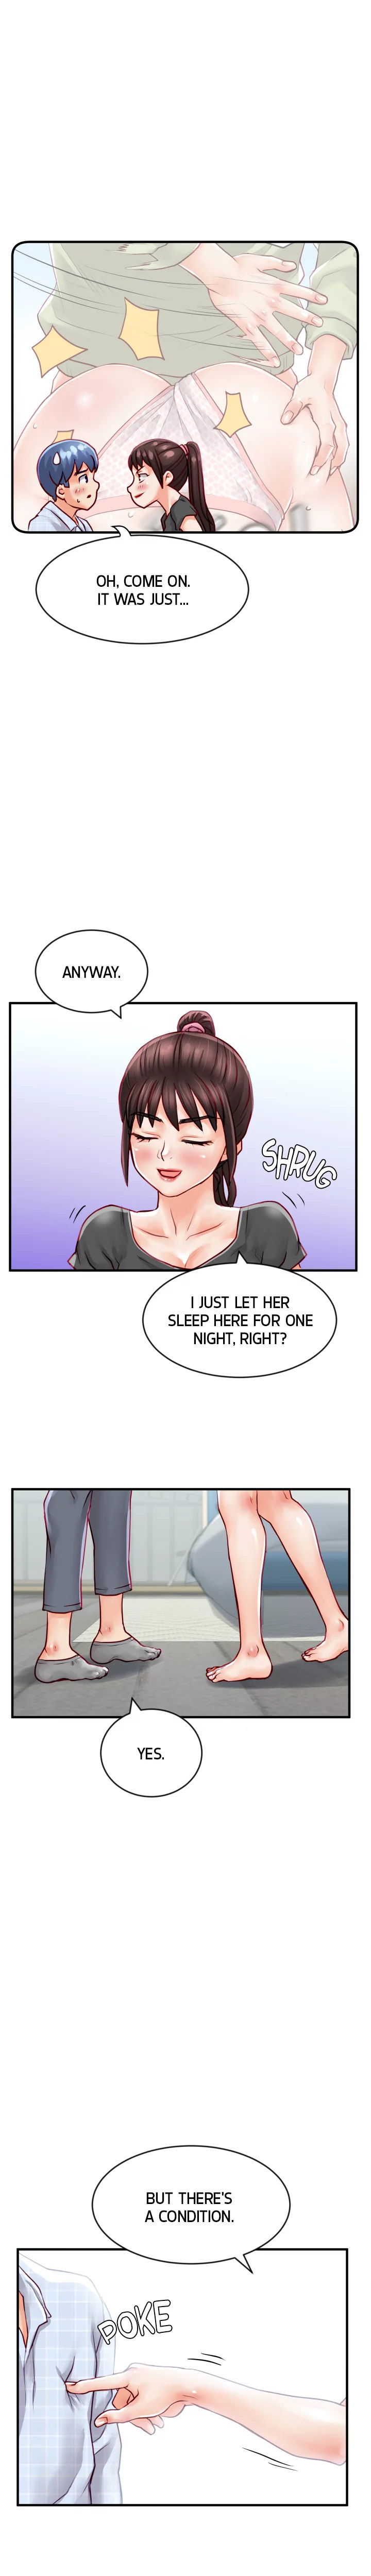 love-is-on-the-air-chap-8-10